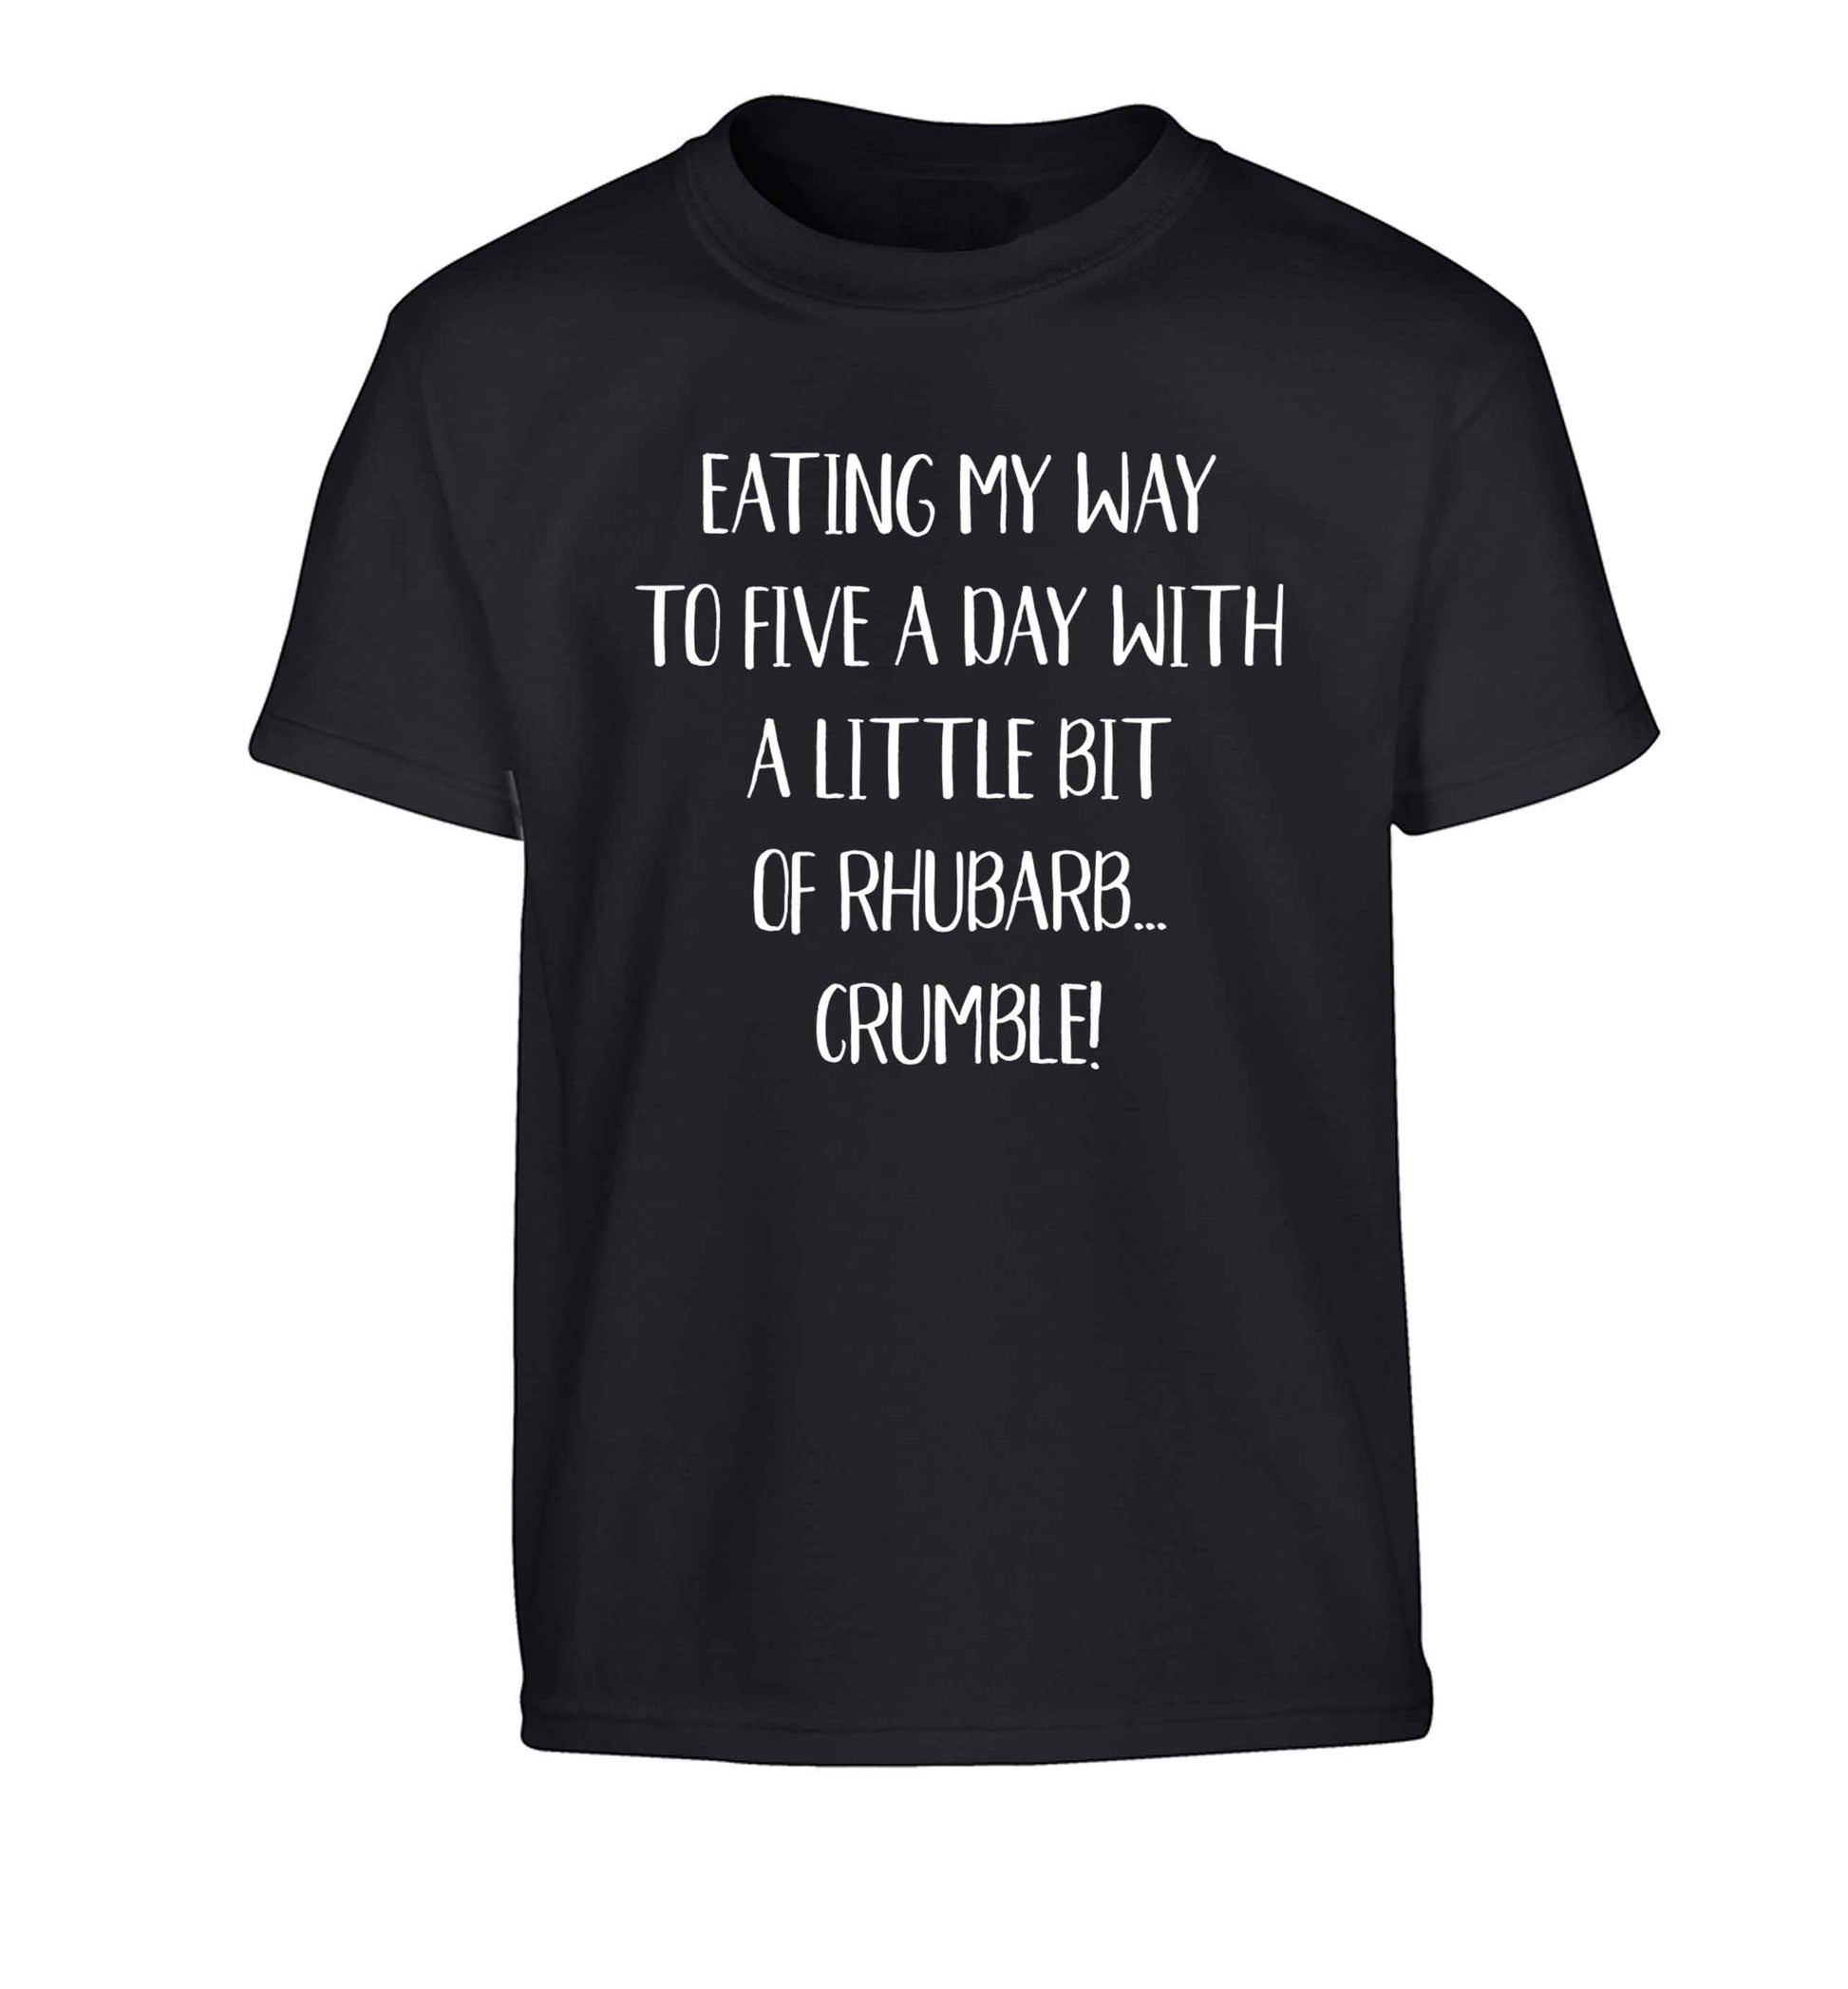 Eating my way to five a day with a little bit of rhubarb crumble Children's black Tshirt 12-13 Years